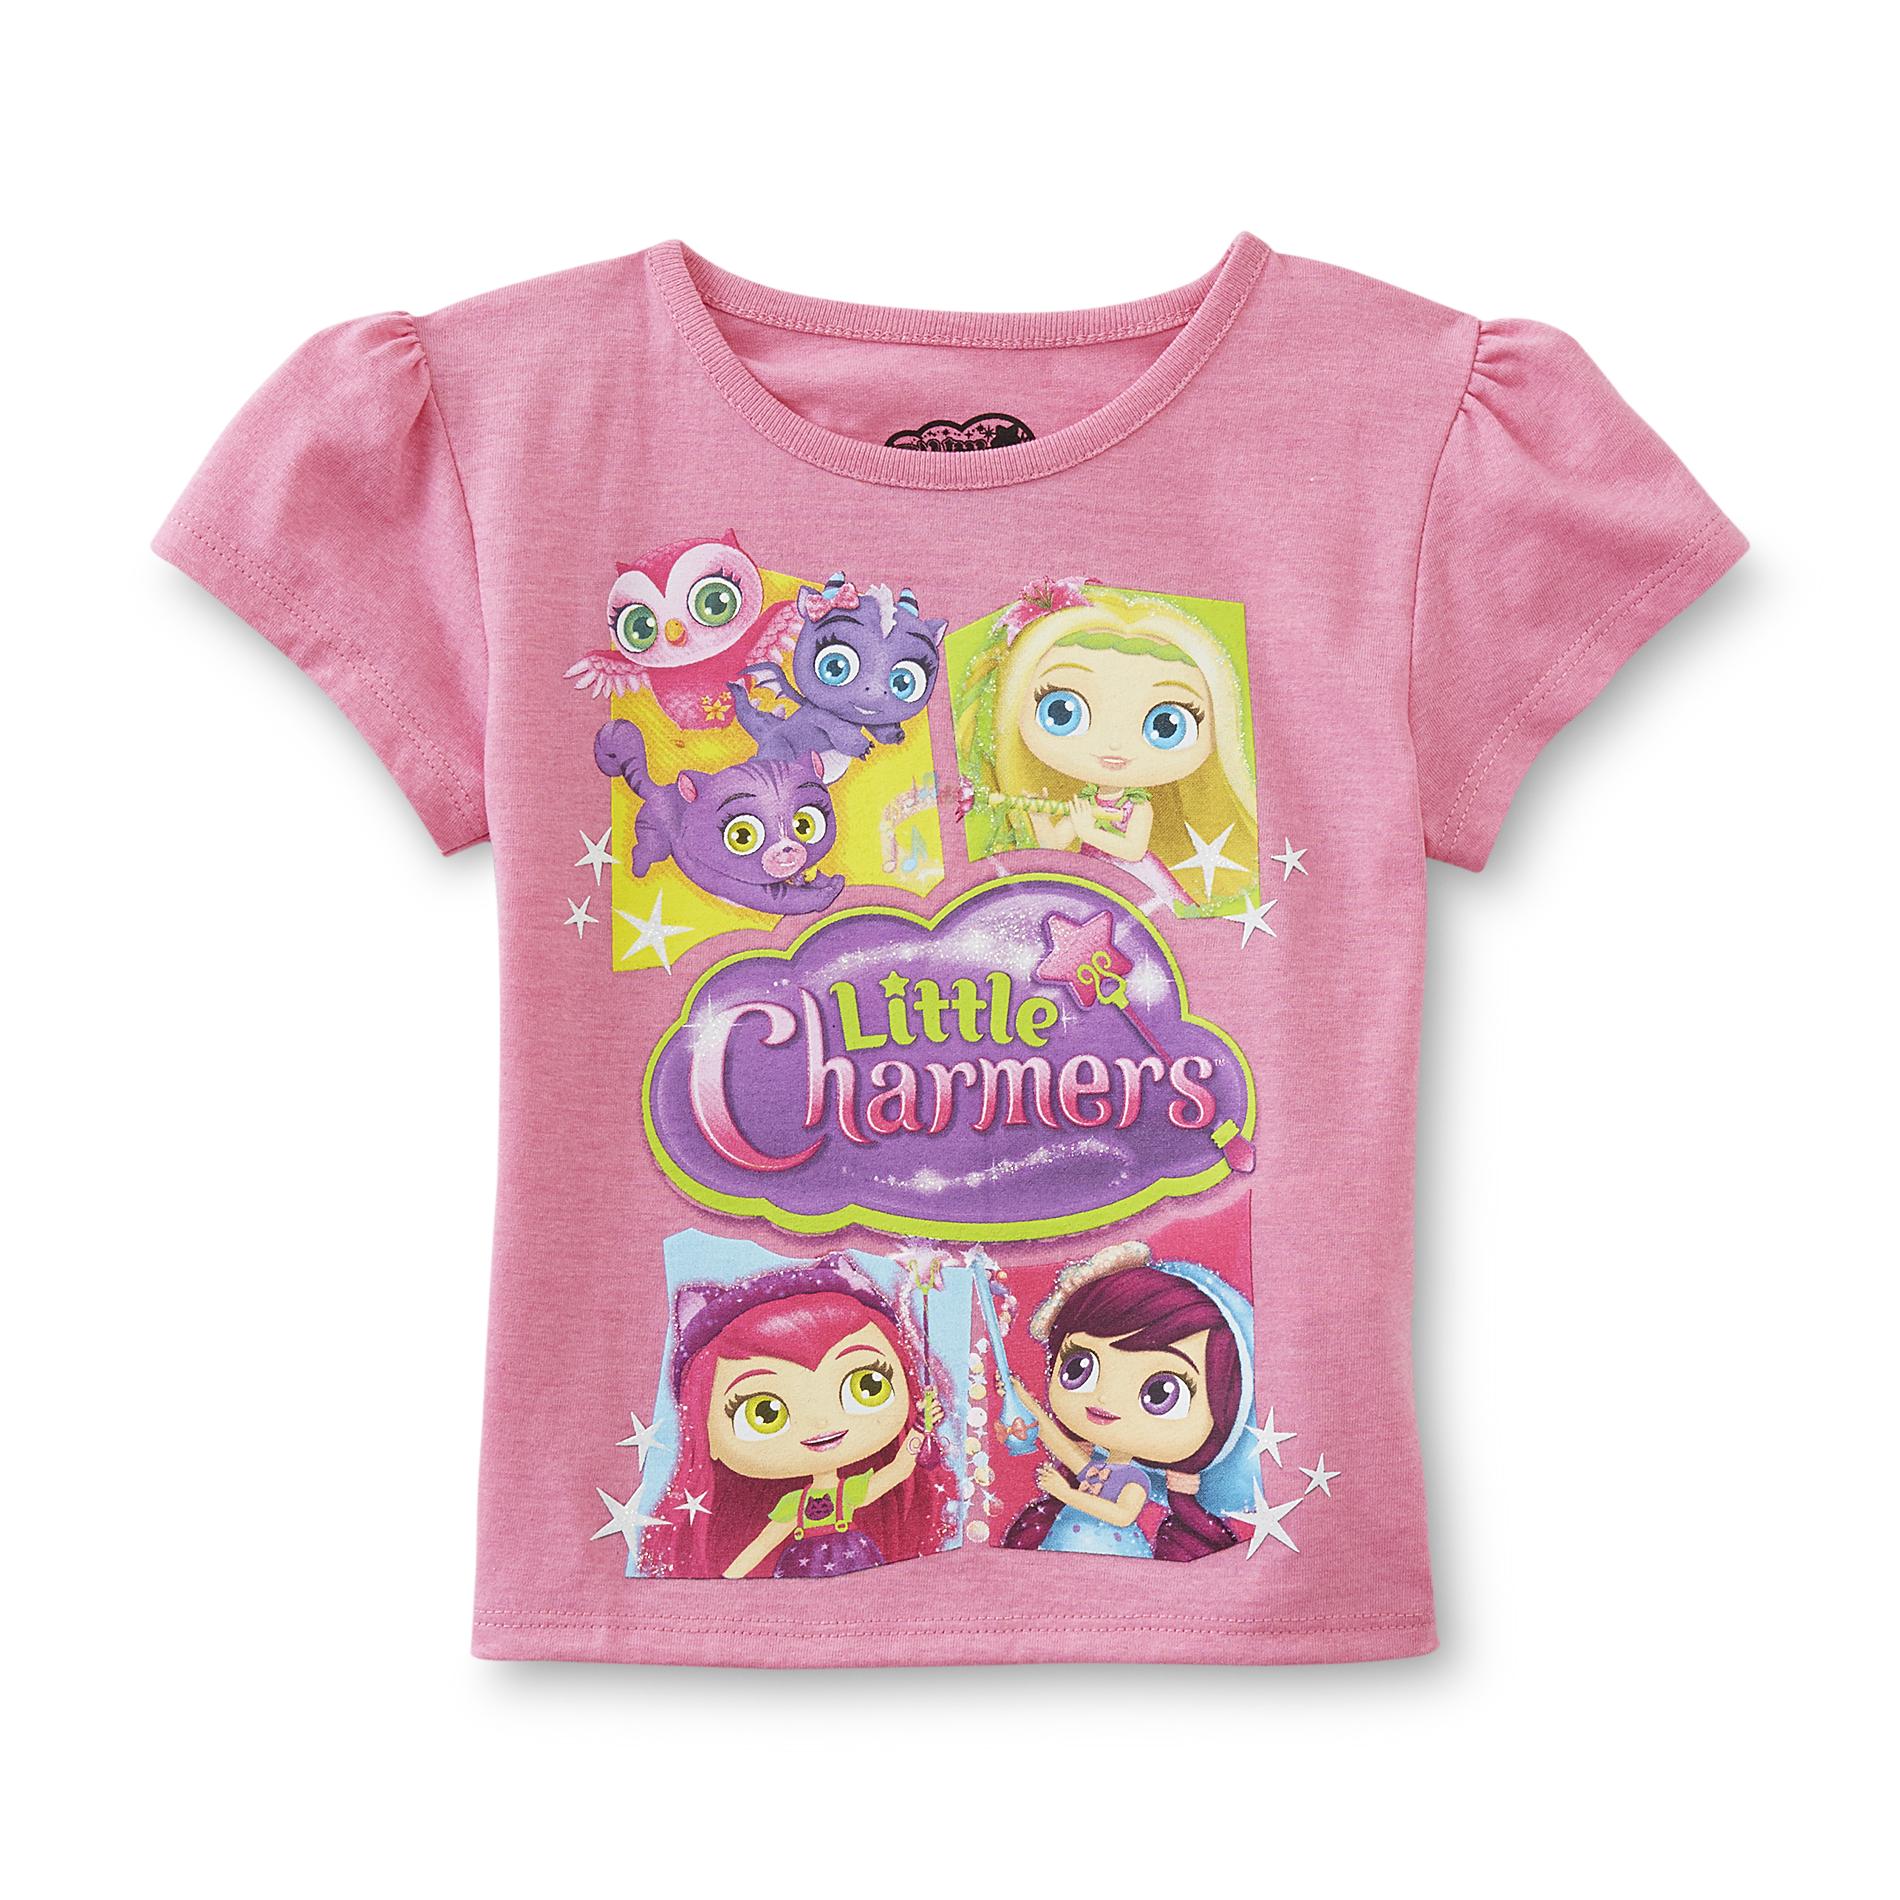 Little Charmers Toddler Girl's Top